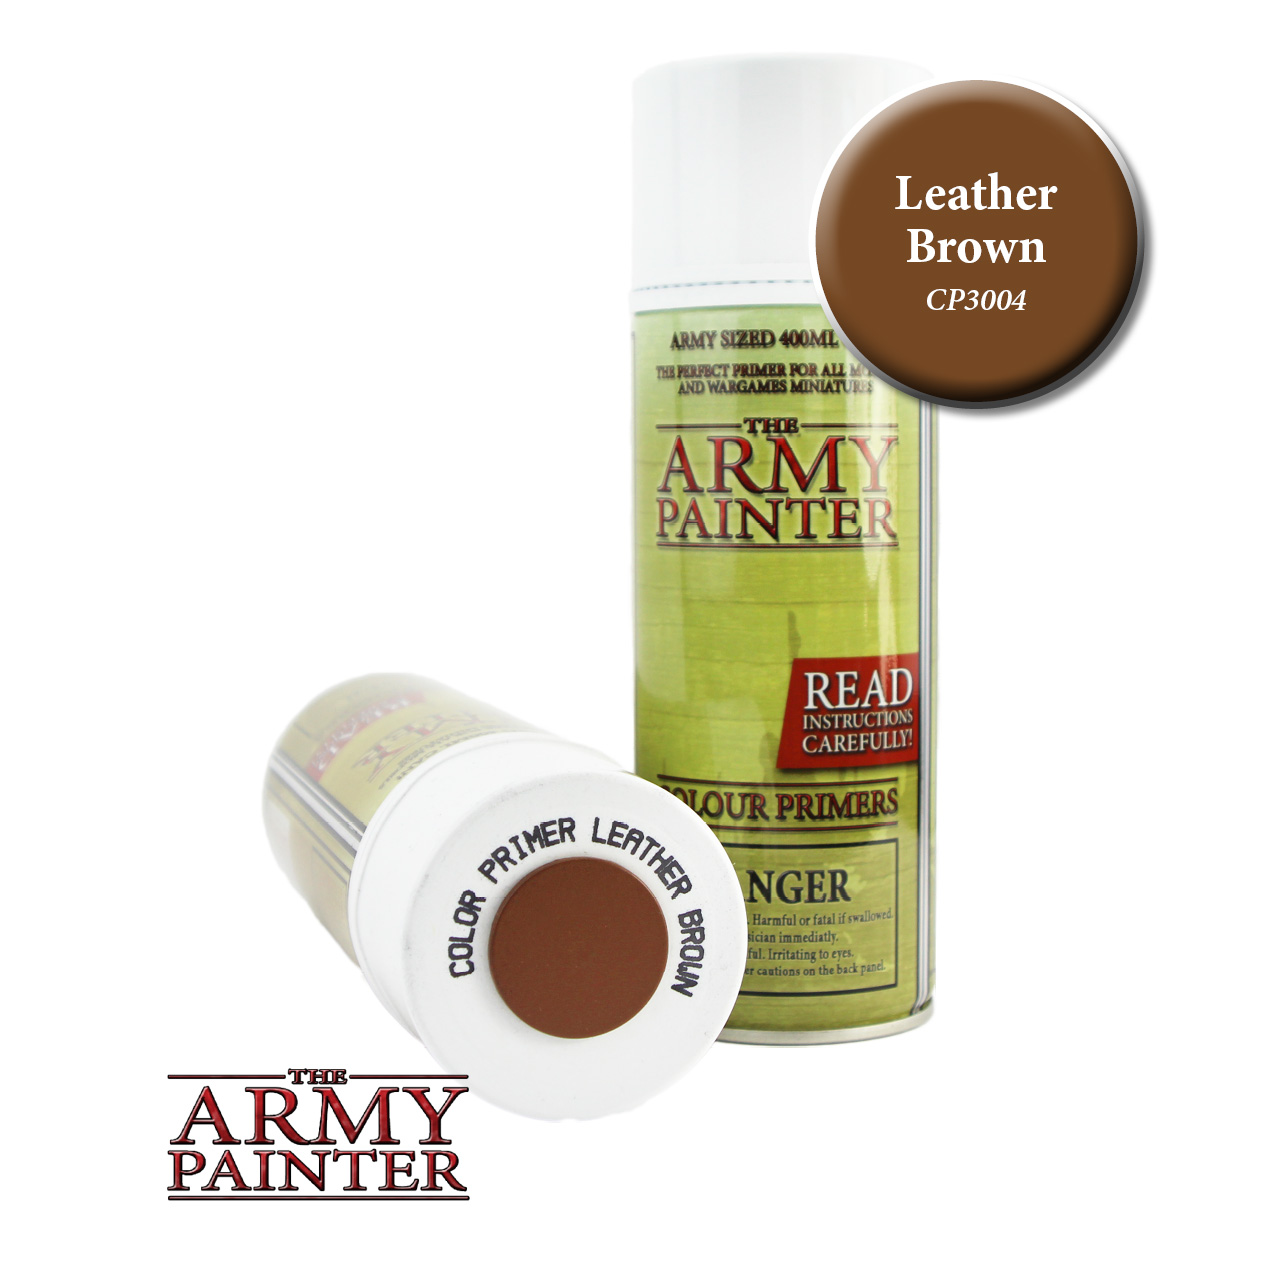 43004 CP3004S ARMY PAINTER SPRAY LEATHER BROWN